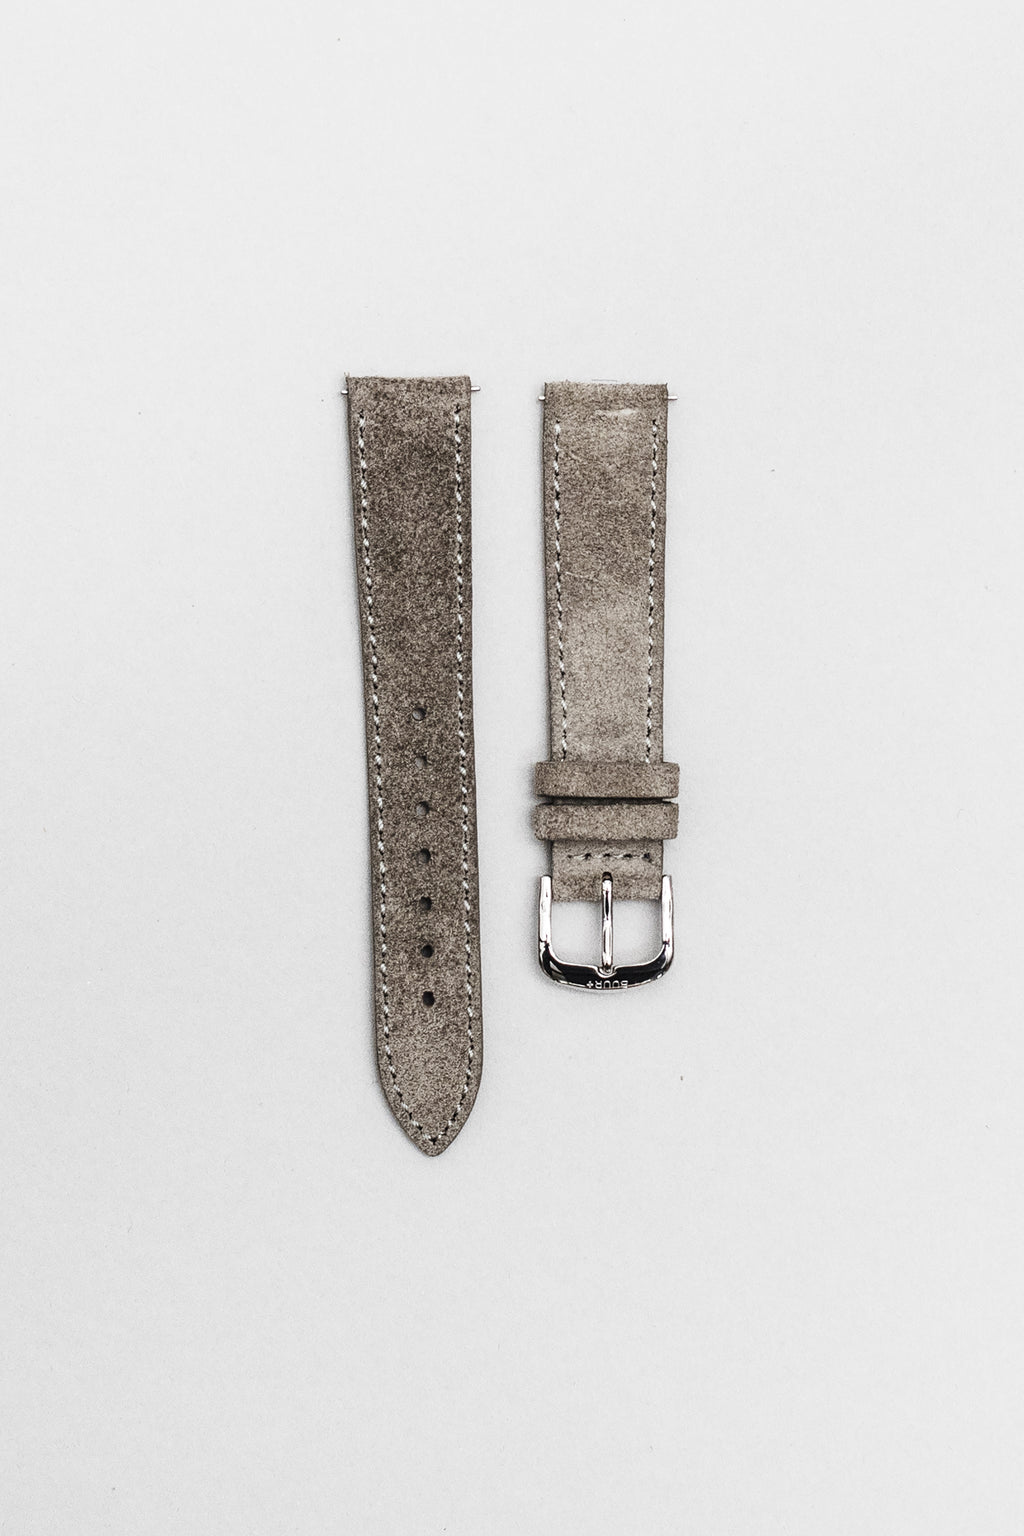 The grey Italian suede strap with polished buckle. 18mm